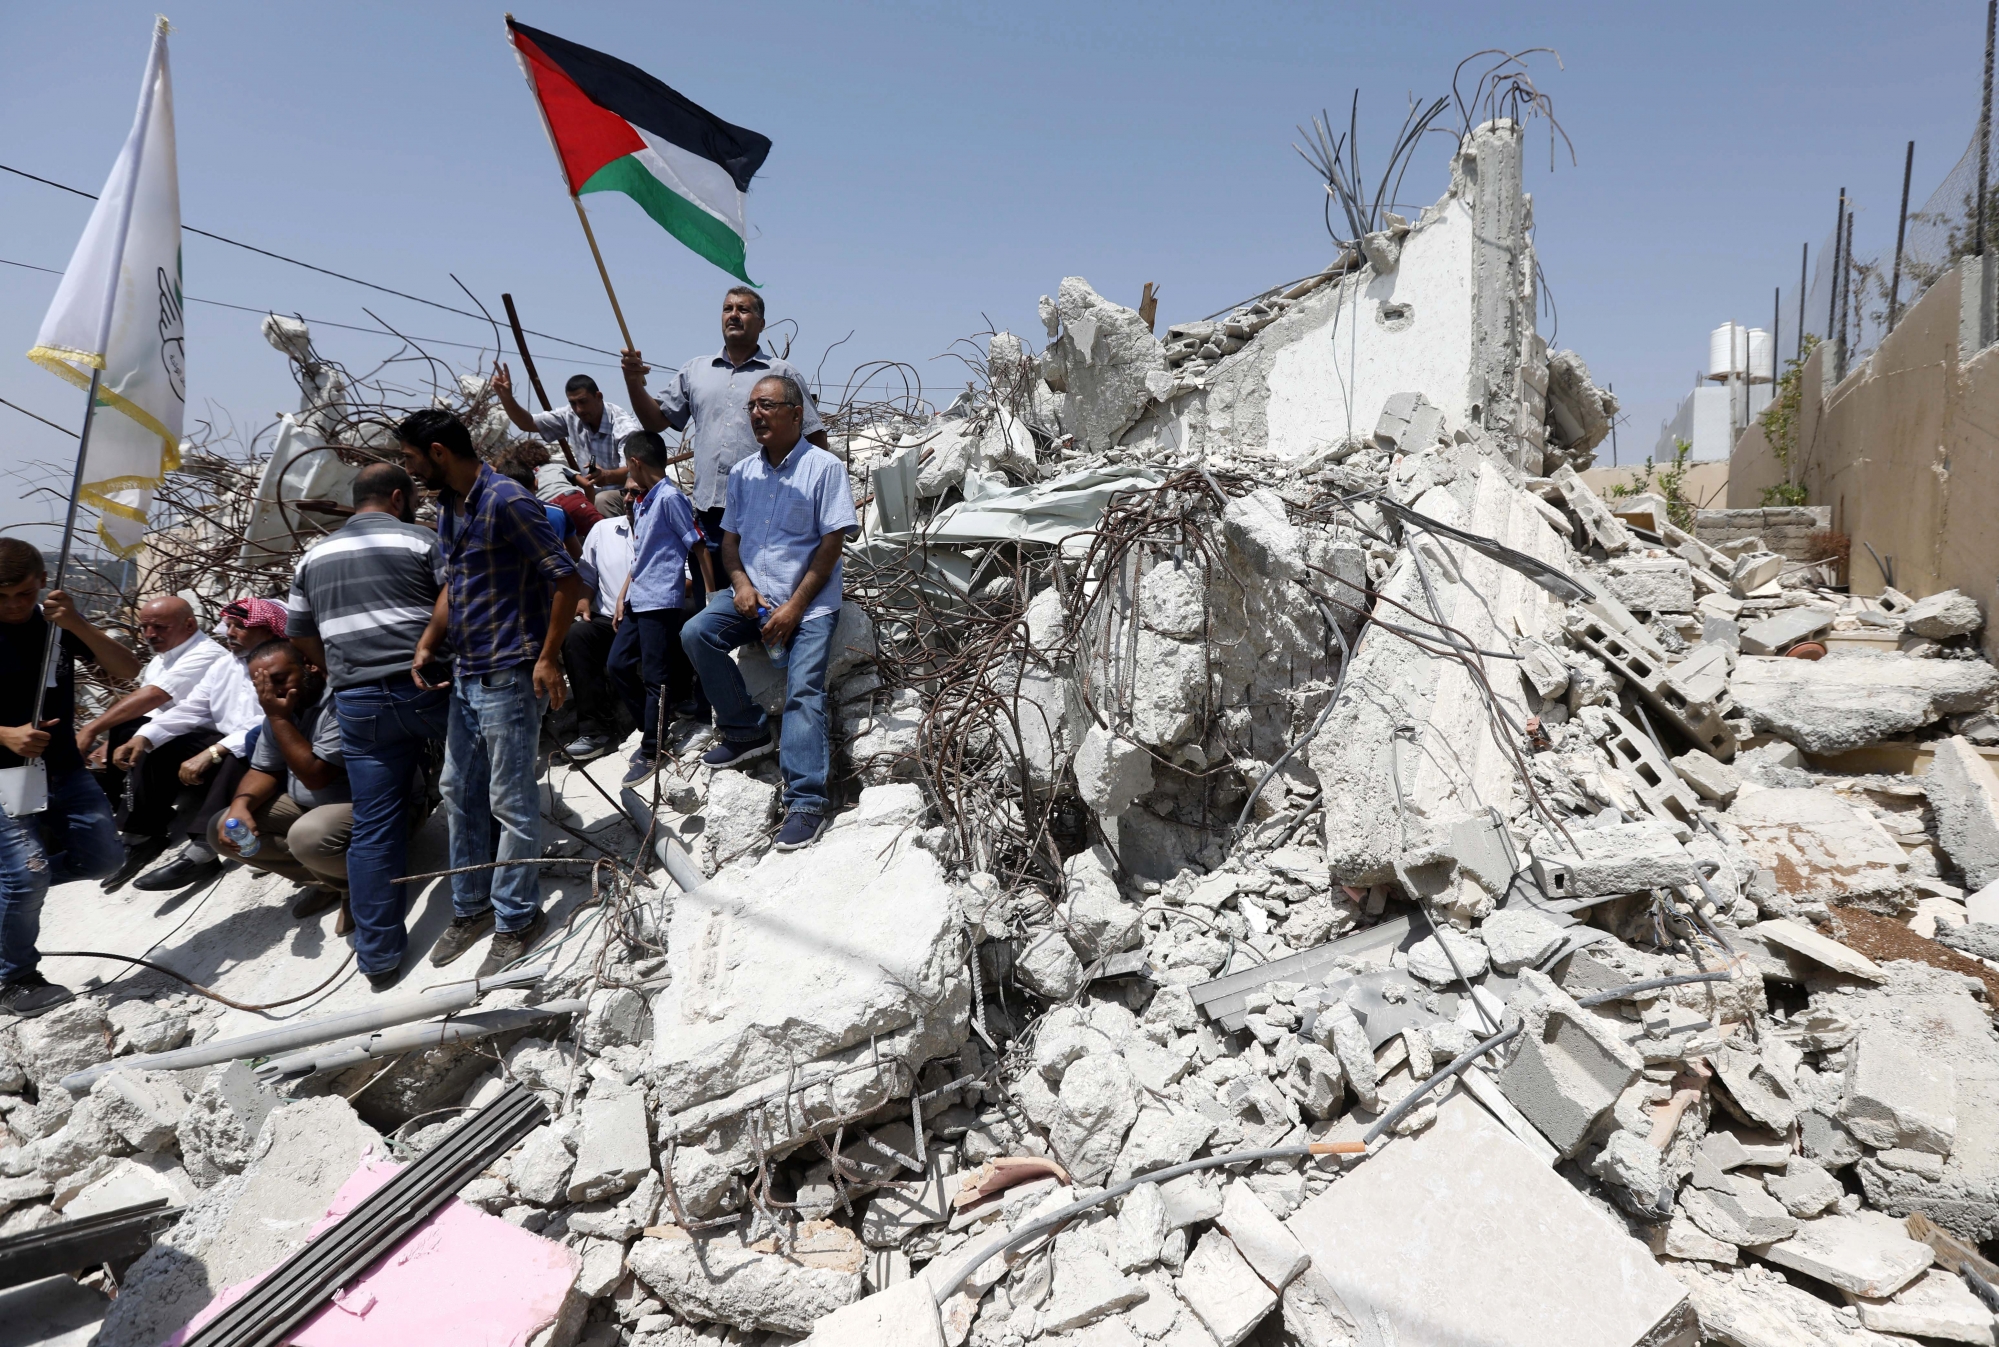 epa06162392 Palestinians hold flags on a house which was demolished in 2016, in the West Bank village of Walajeh, during a protest near Bethlehem, 25 August 2017. Palestinians protest against house demolishing in the village by the Israeli army, more than 20 houses received demolish notification by the Israeli army, that claimed they dont have the Israeli permits  needed to build in area C.  EPA/ABED AL HASHLAMOUN MIDEAST PALESTINIANS PROTEST